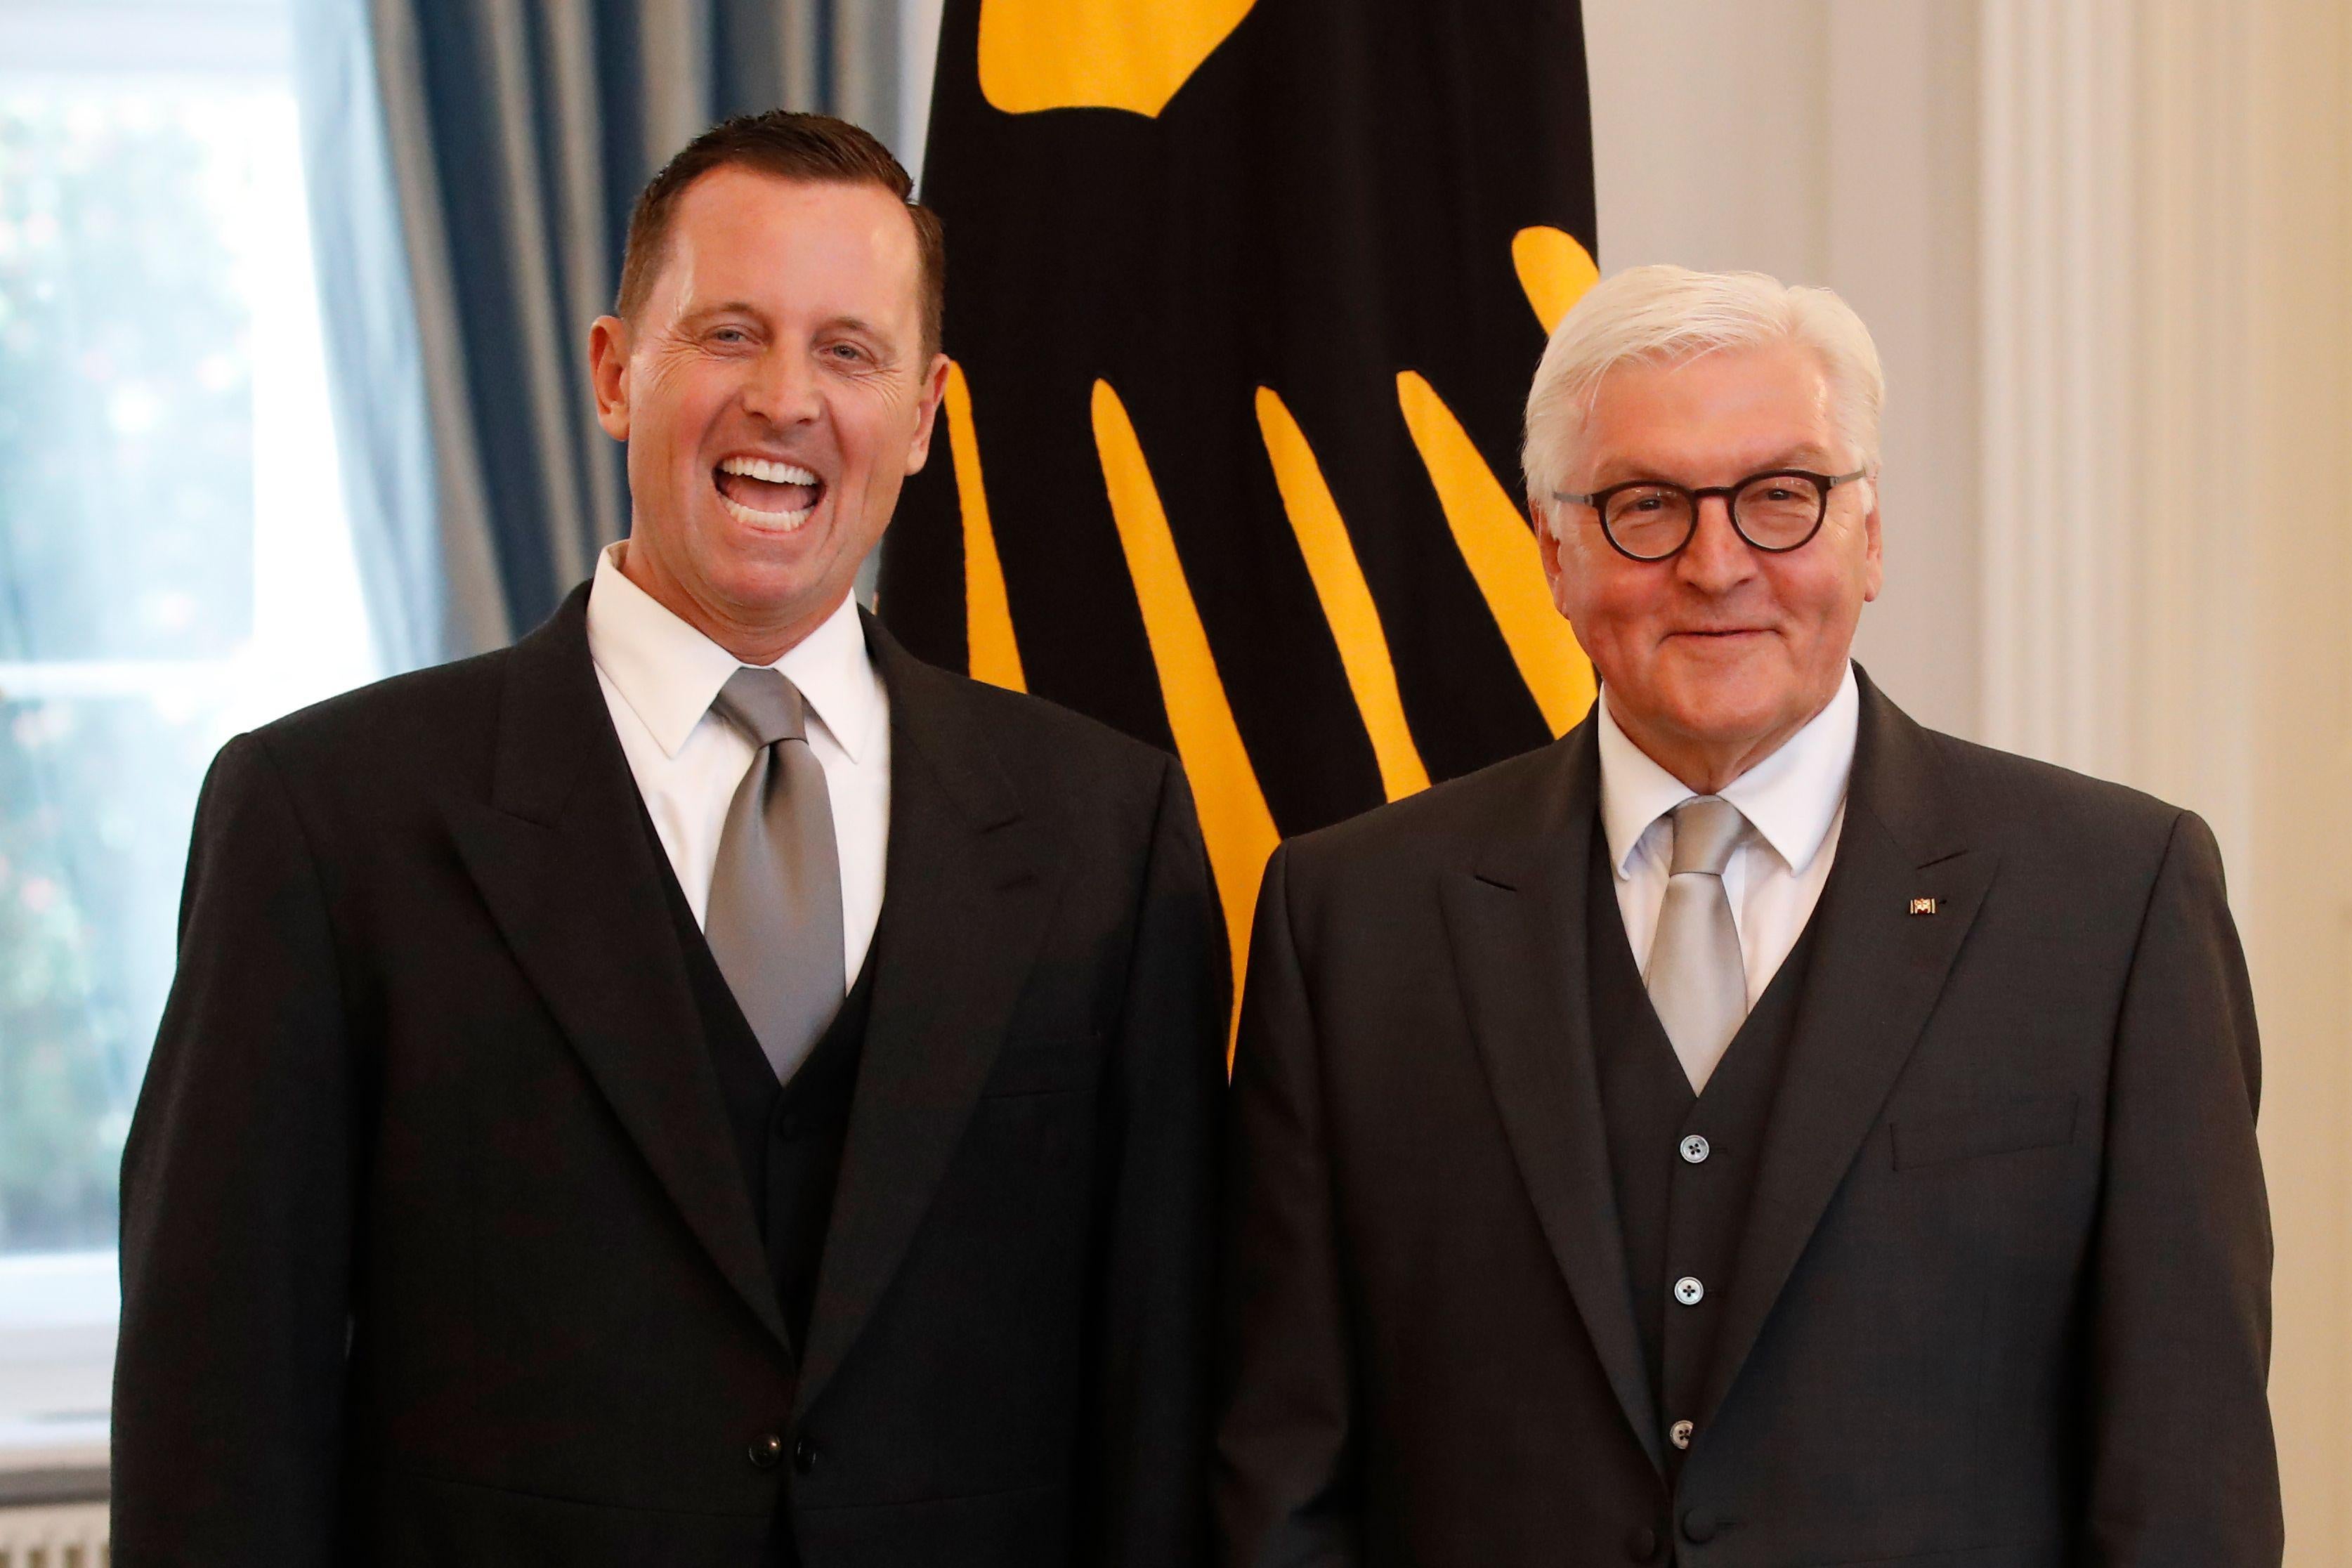  Richard Allen Grenell makes a face while posing with German President Frank-Walter Steinmeier.